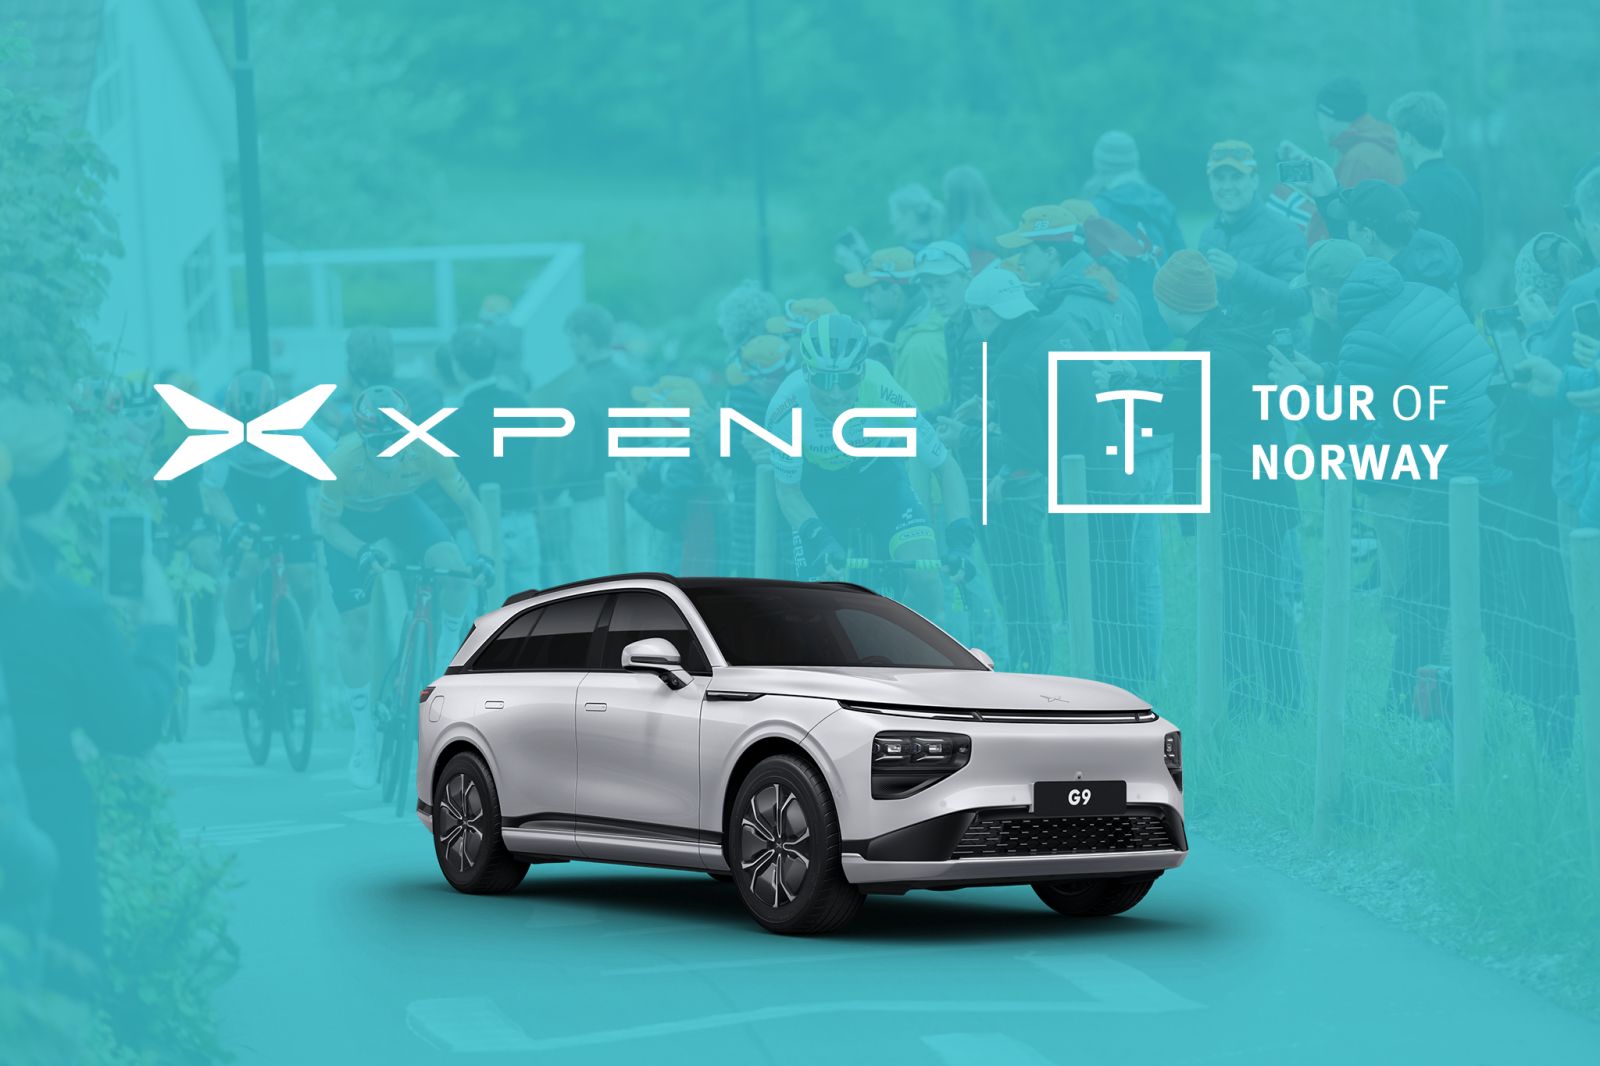 XPENG join Tour of Norway as official car partner